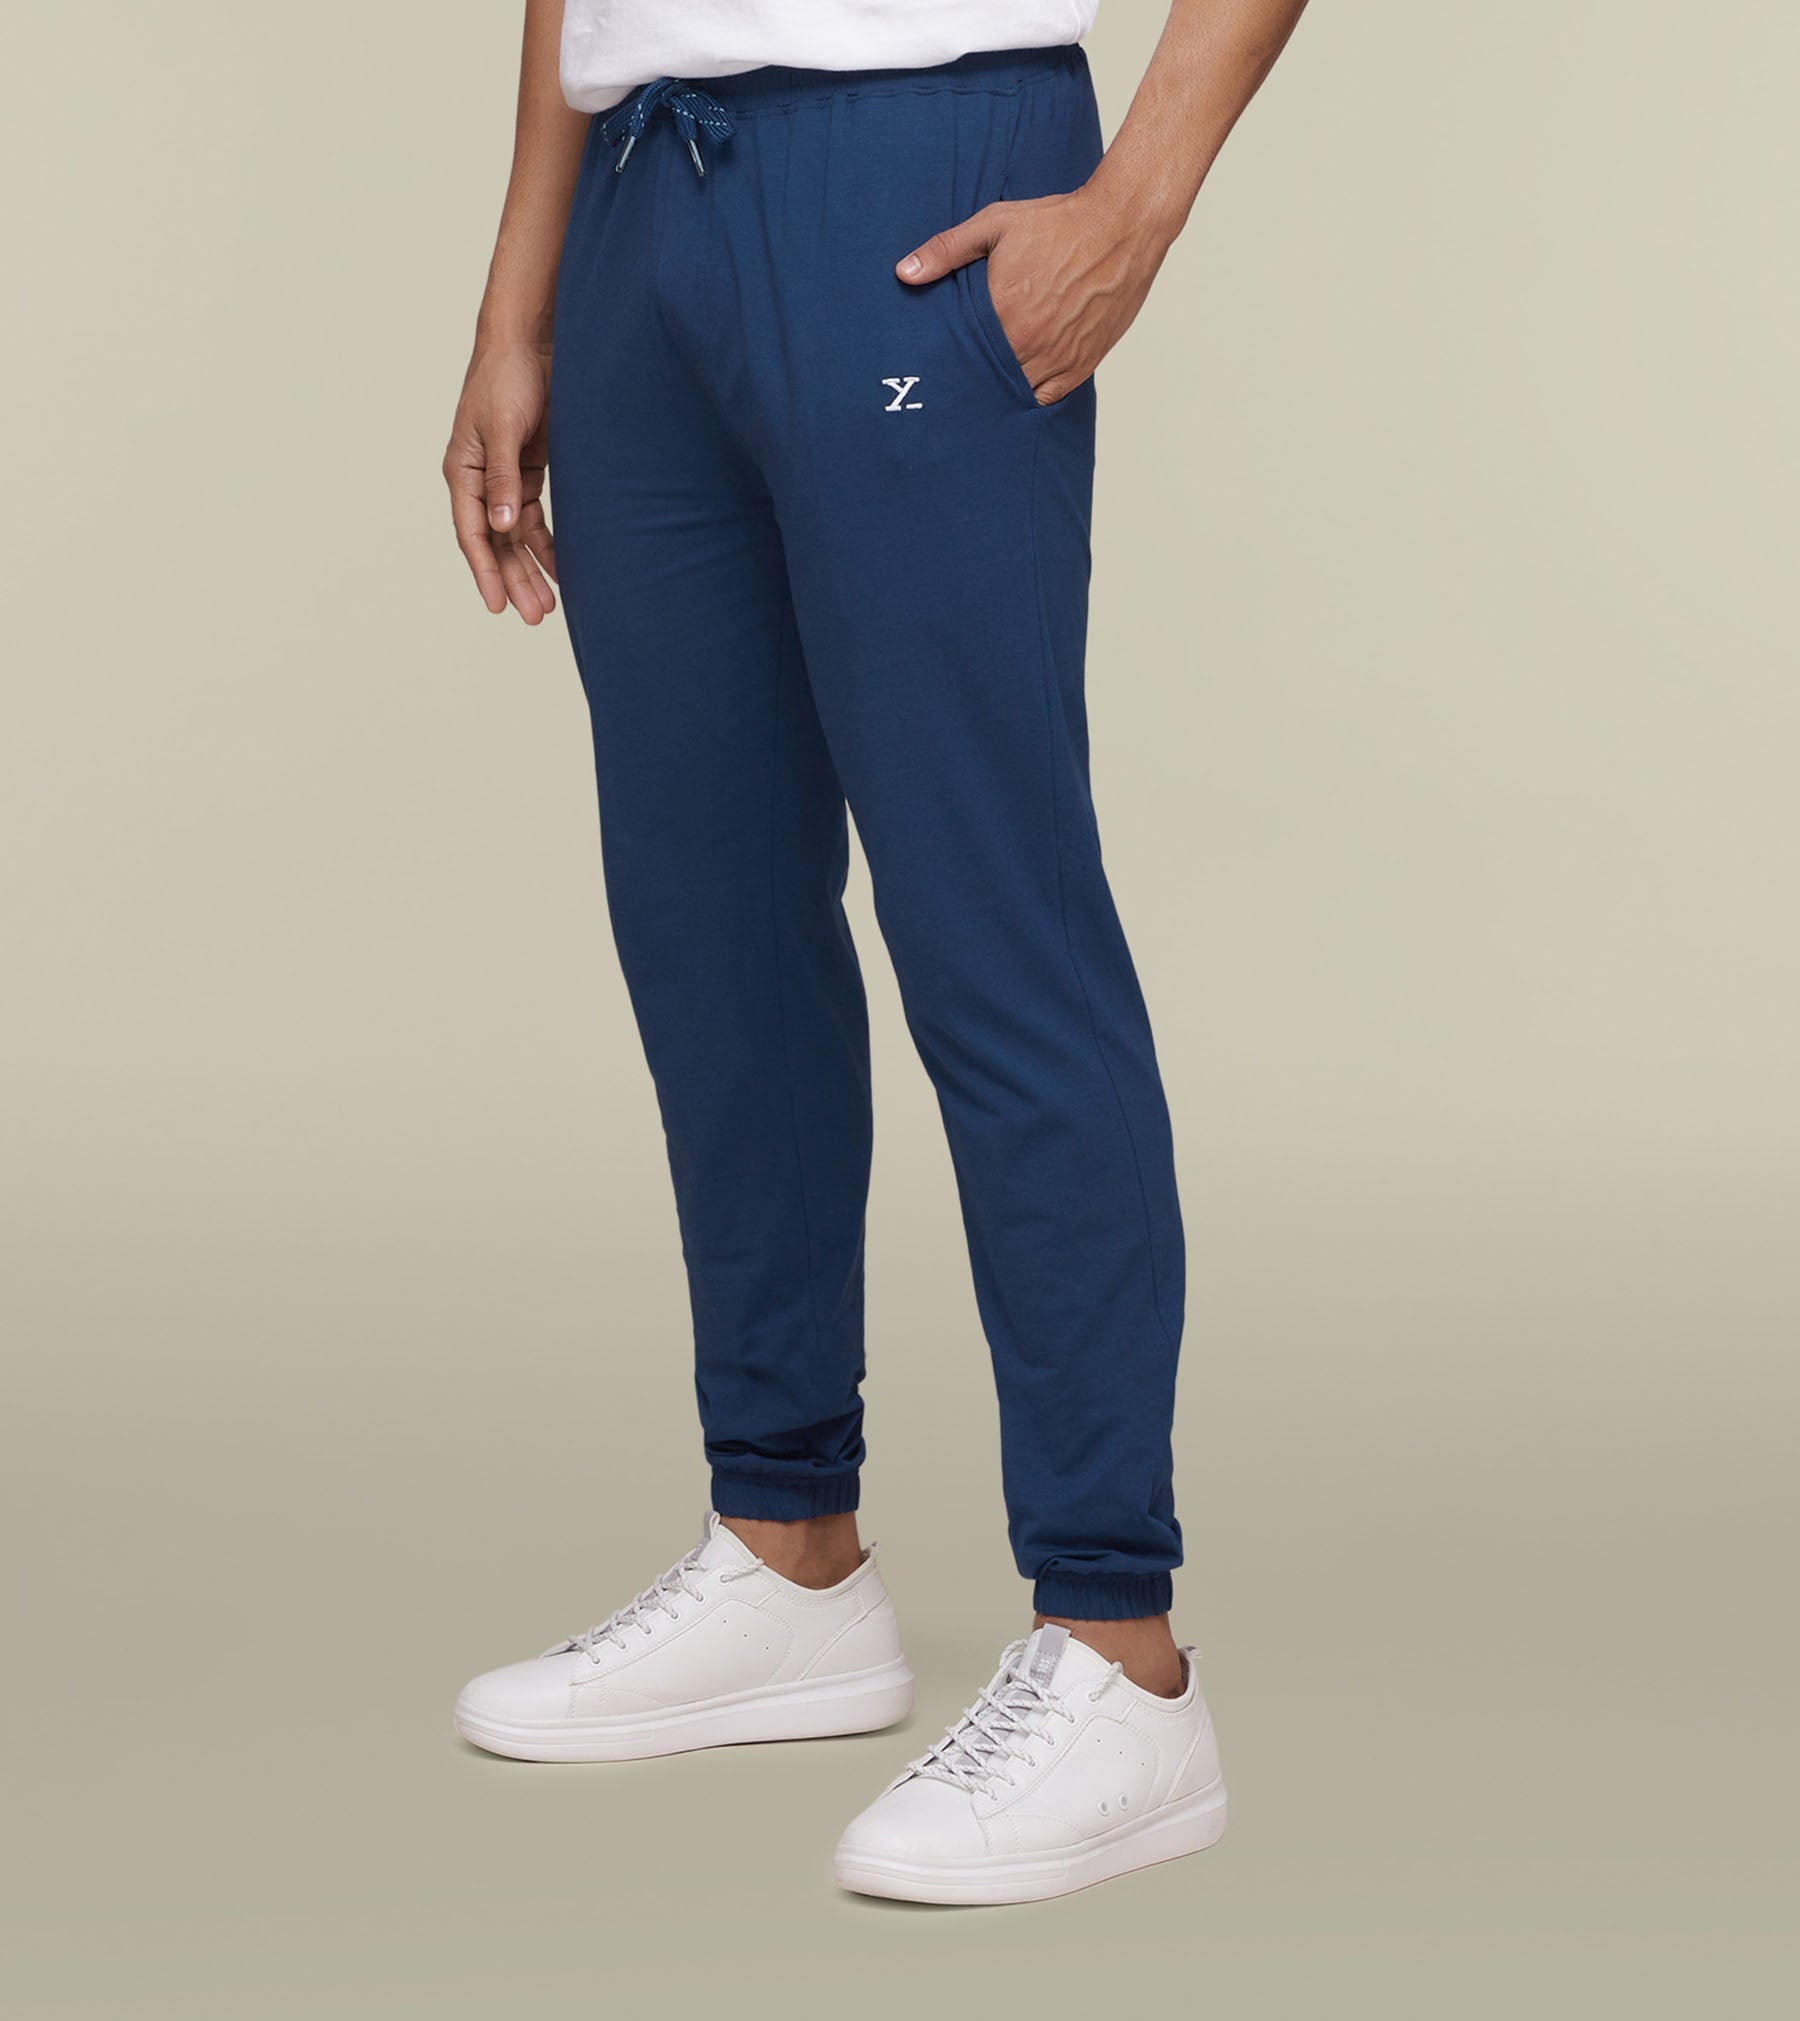 Joggers for Men - Buy Stylish Joggers Track Pants Online in India – XYXX  Apparels